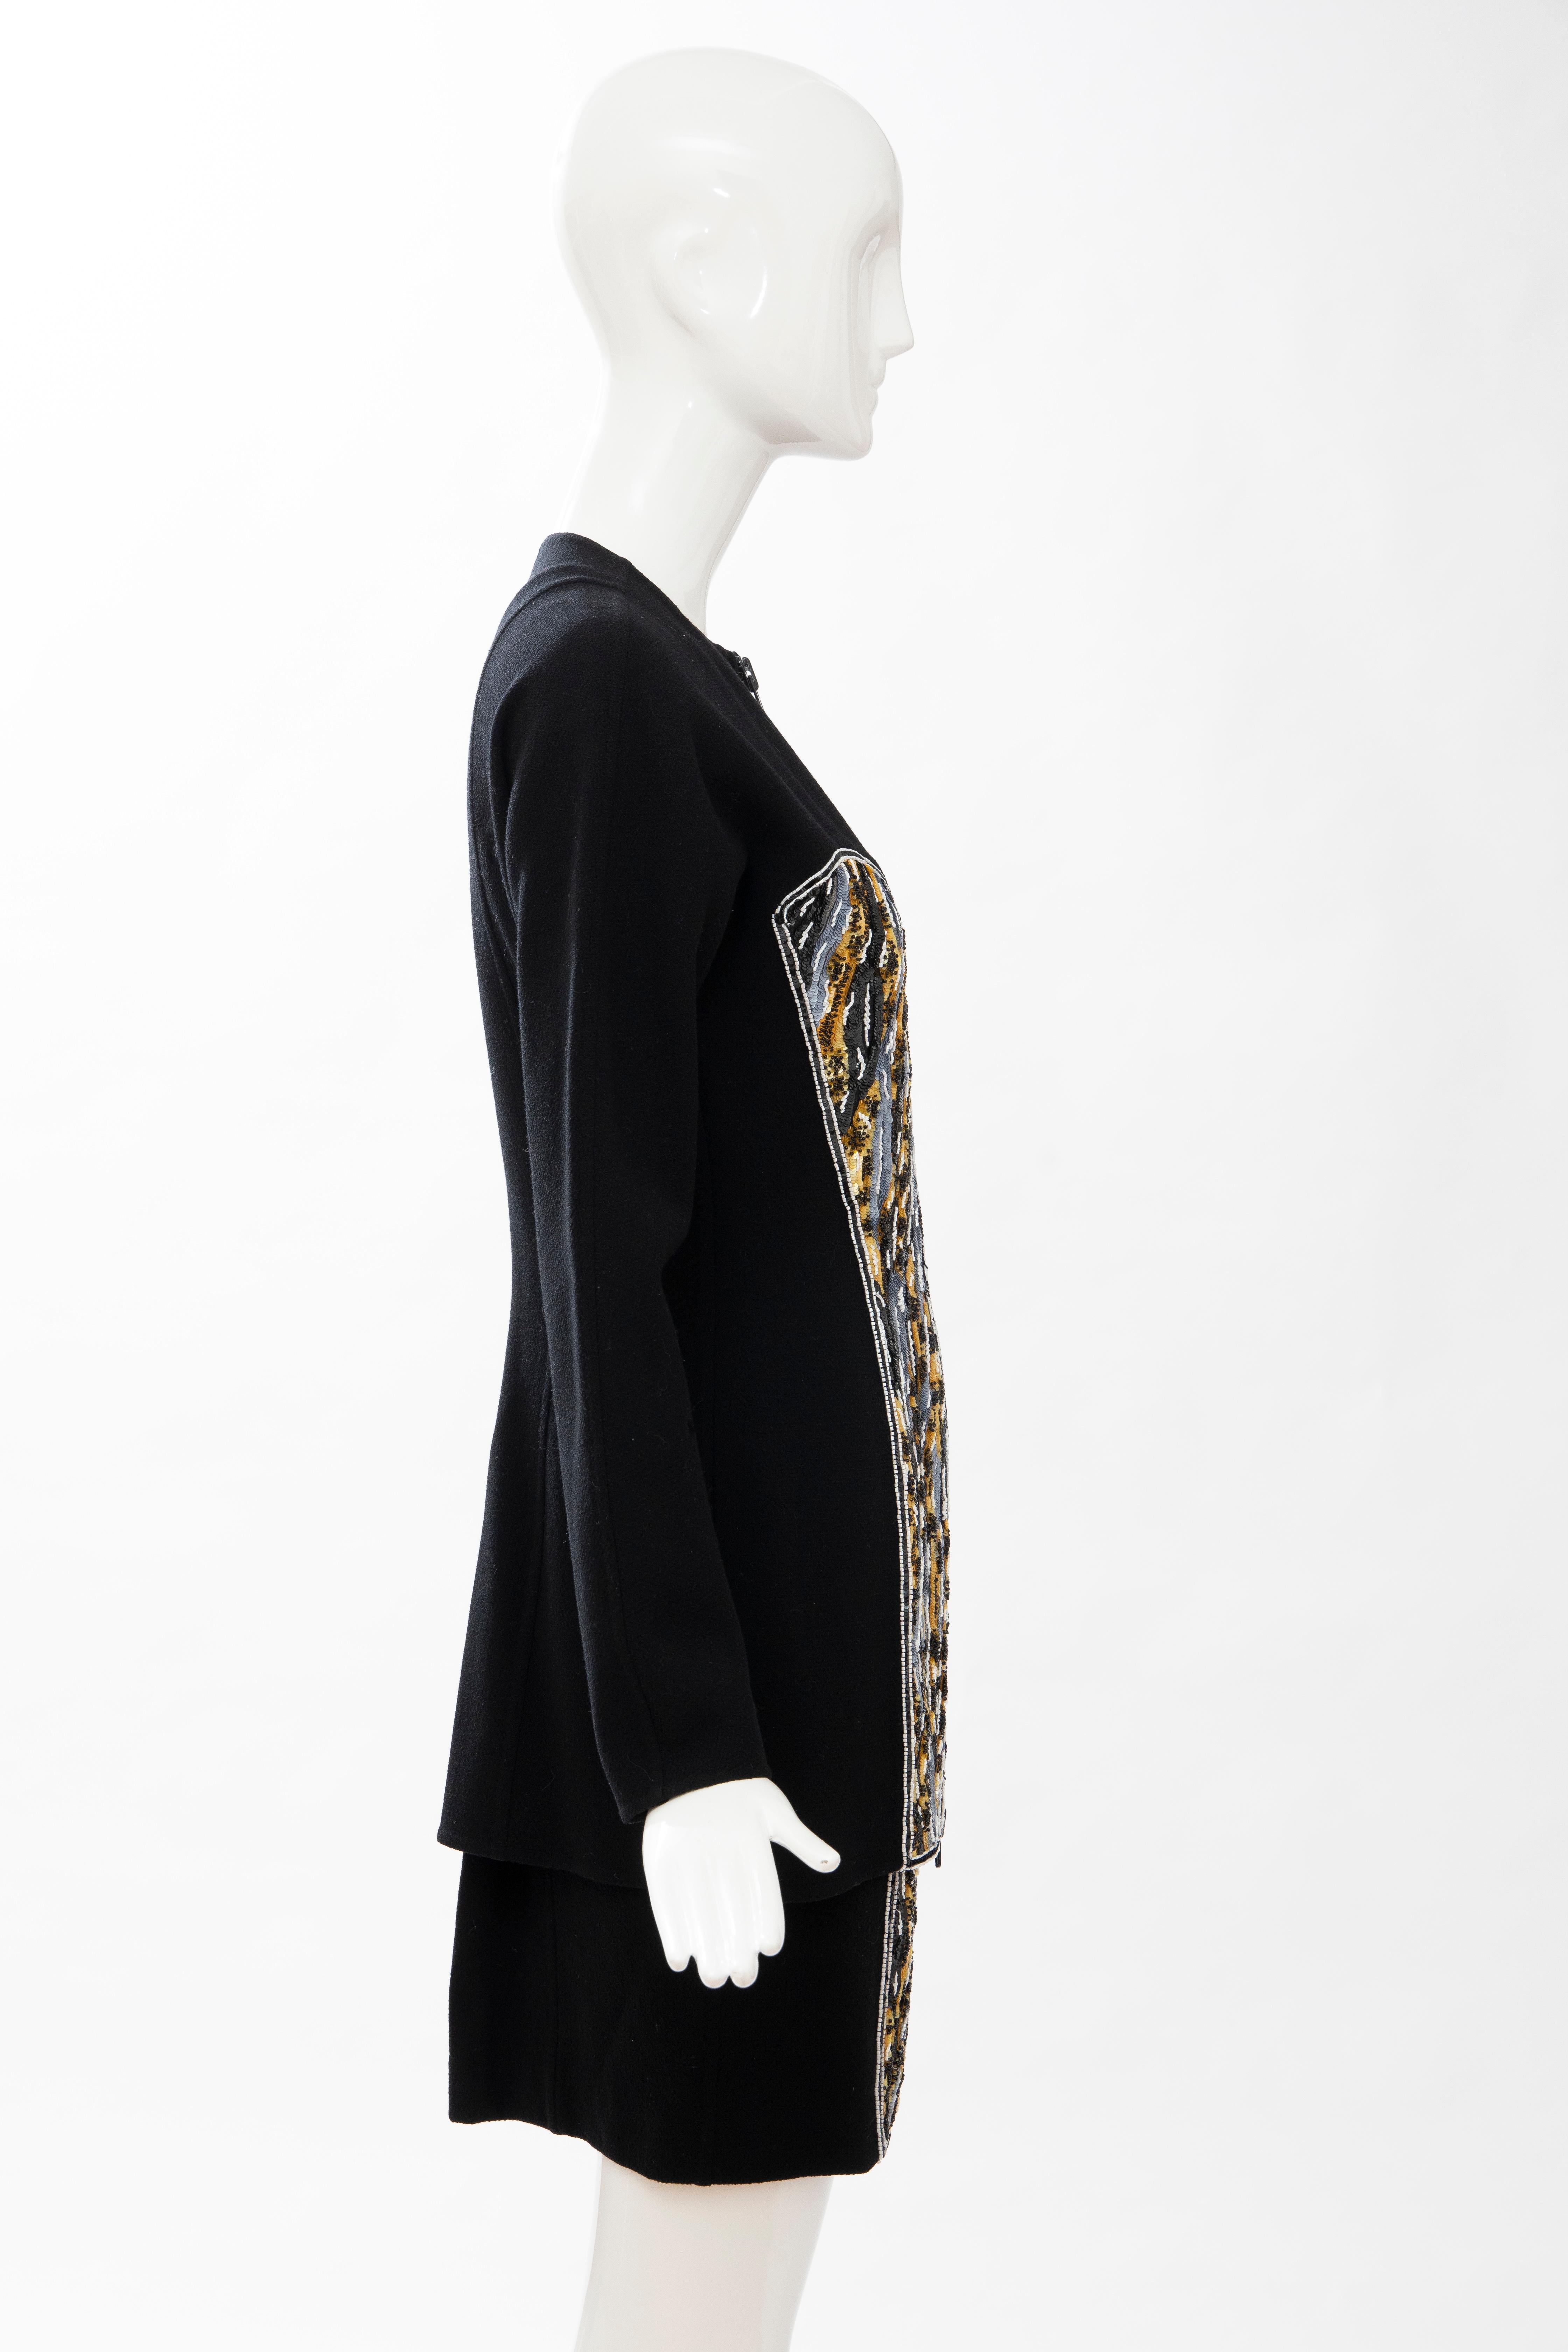 Geoffrey Beene Black Wool Crepe Embroidered Sequins Dress Ensemble, Circa 1990's For Sale 4